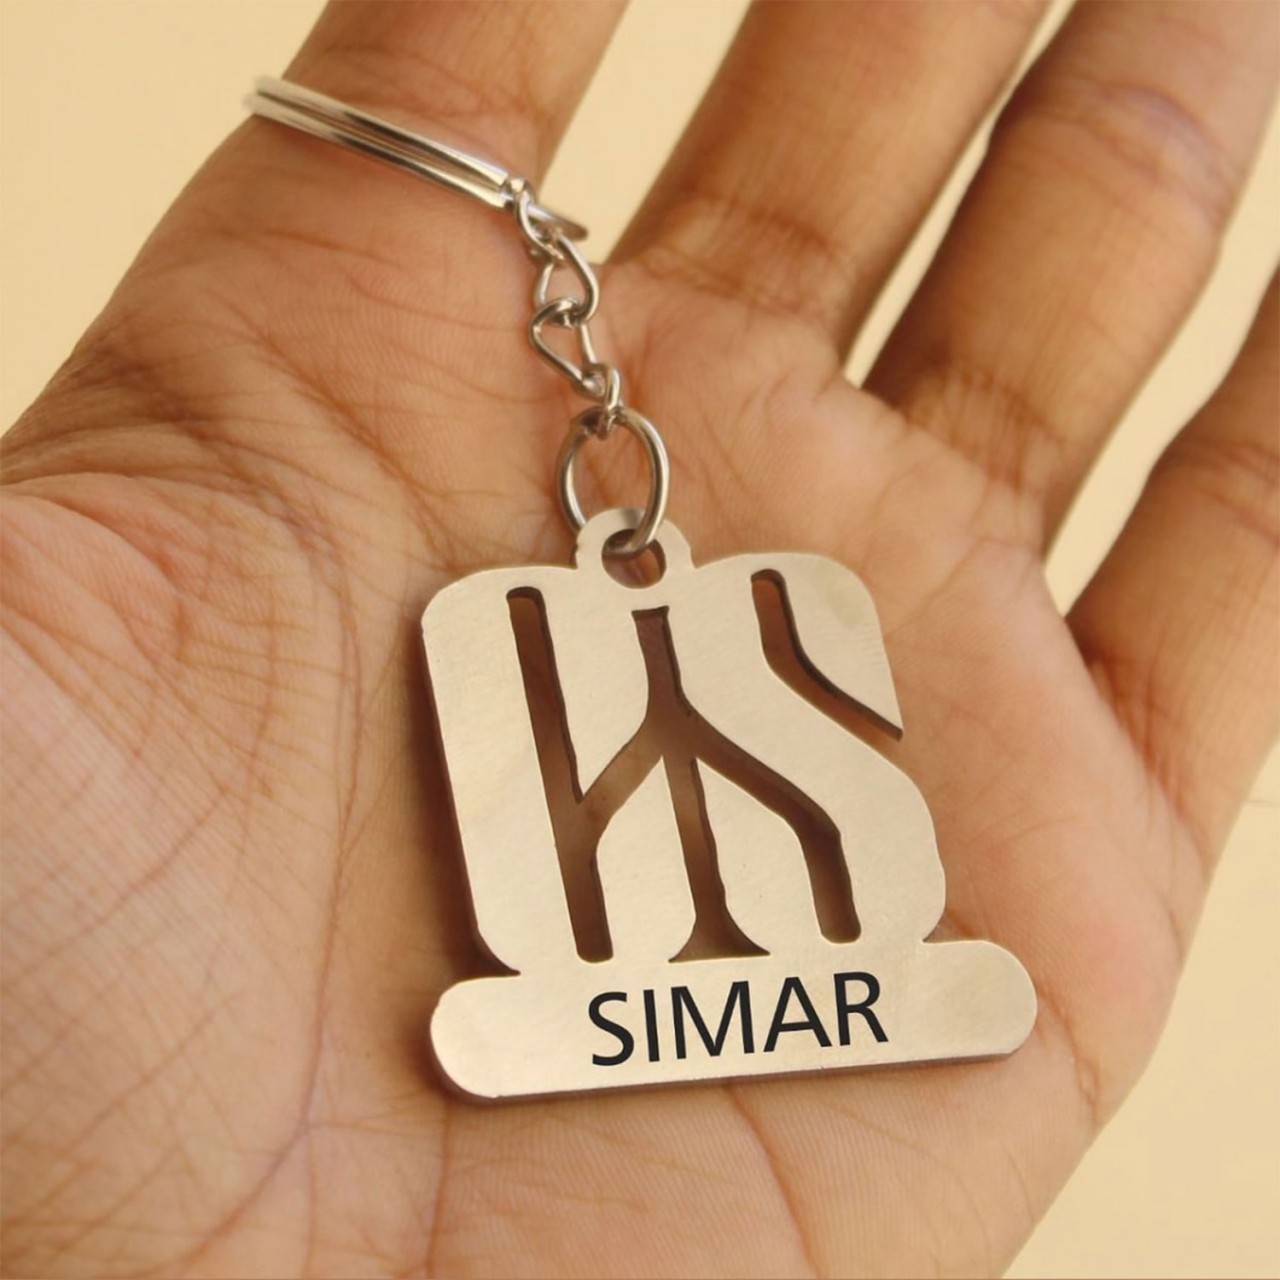 Personalized Metal Key Chain With Name